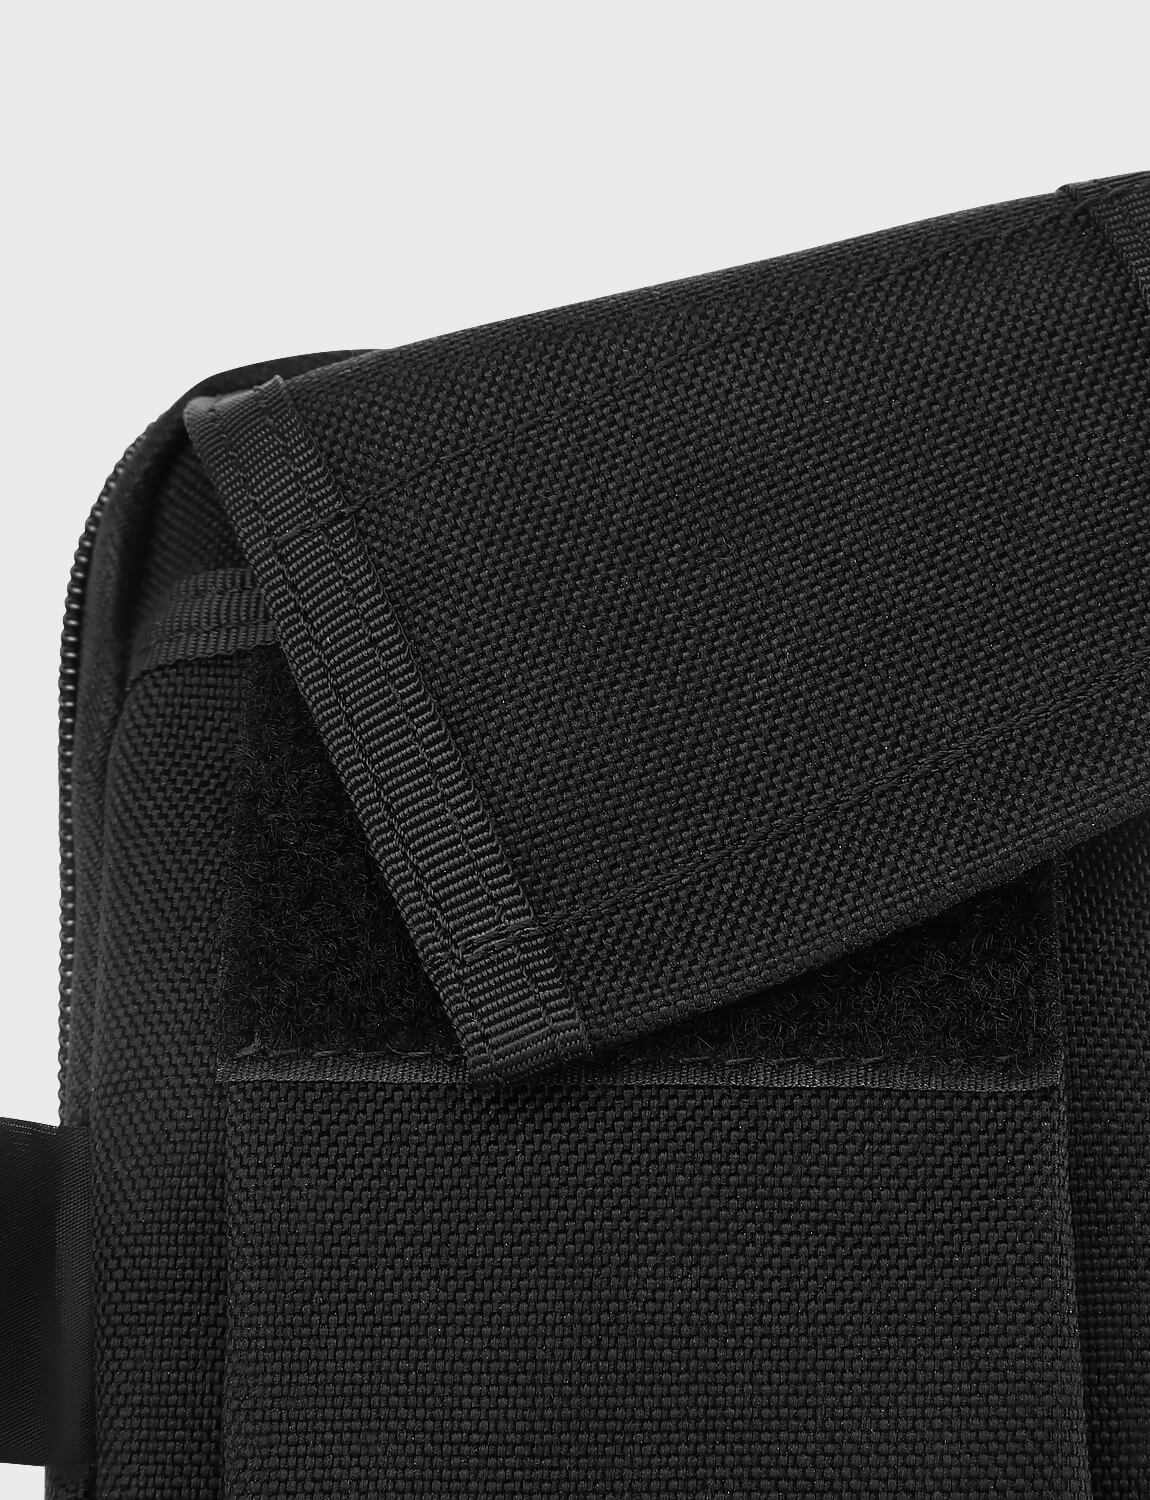 BOBLOV Body Camera Case Protection Pouch for All Brands of Body Cameras in Black4